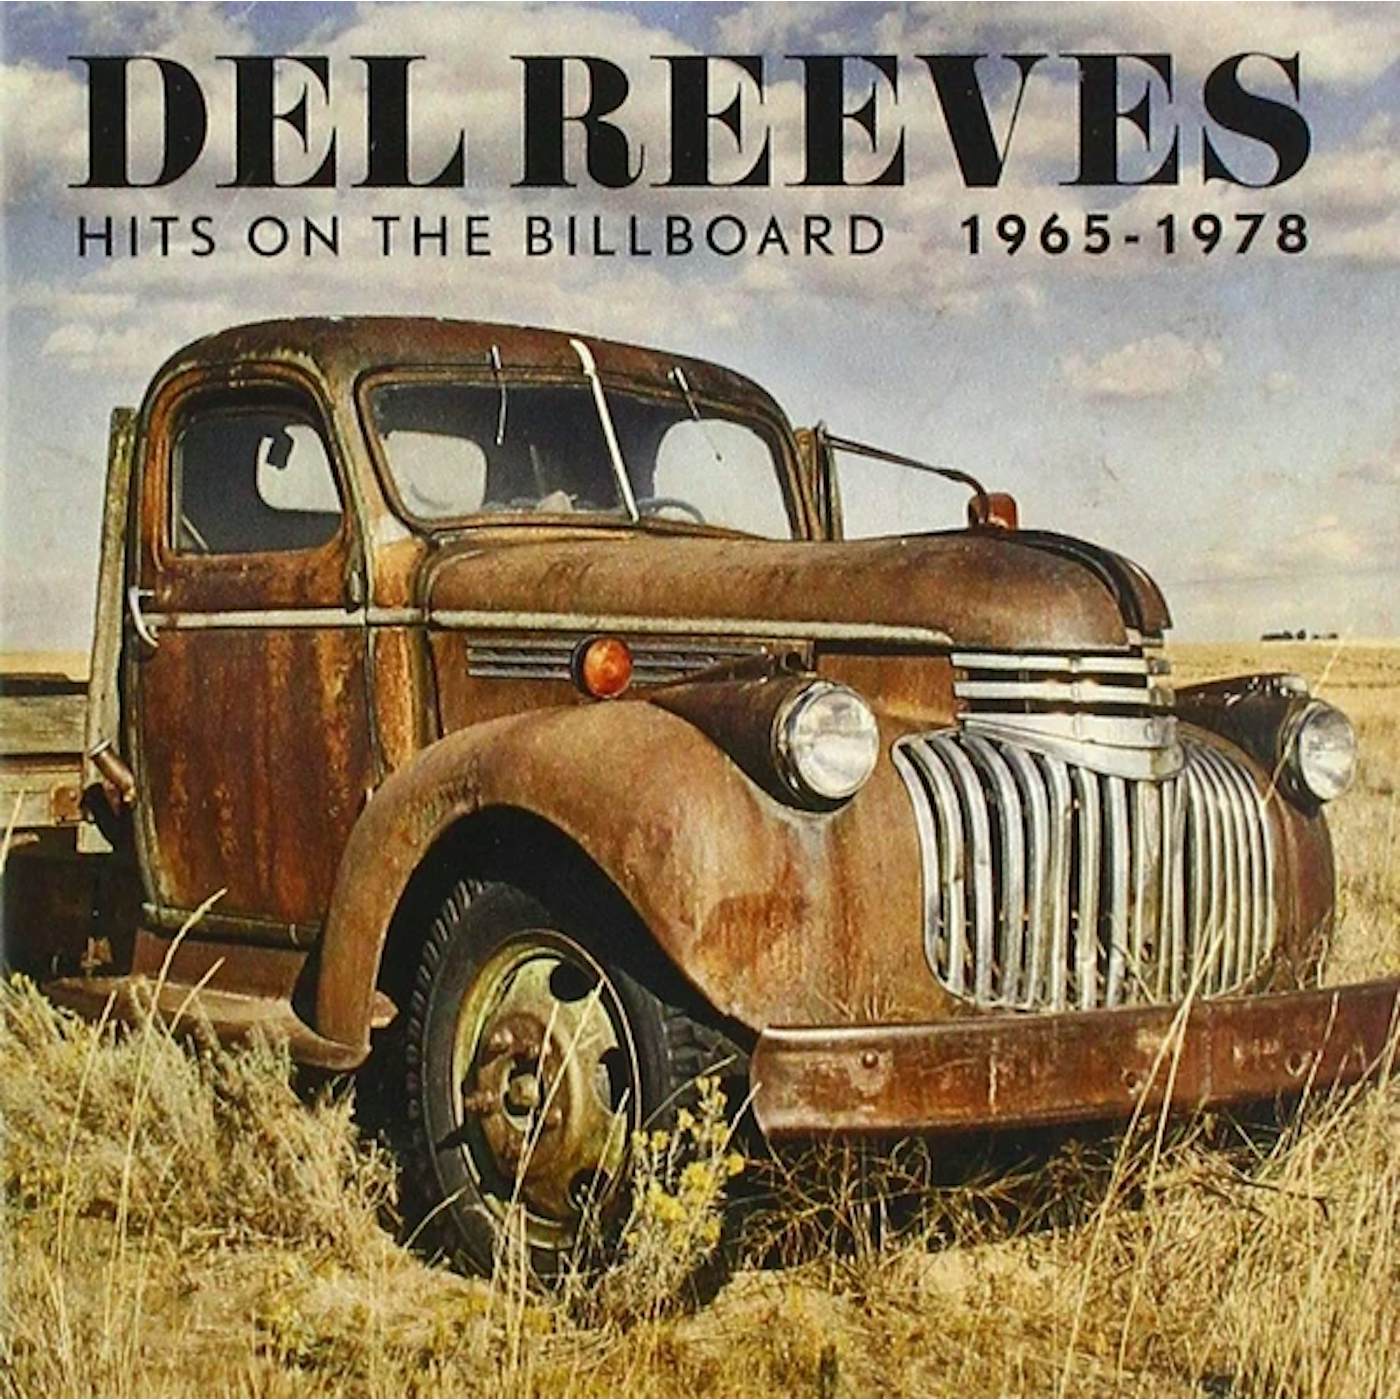 Del Reeves HITS ON THE BILLBOARD 1965-1978 CD